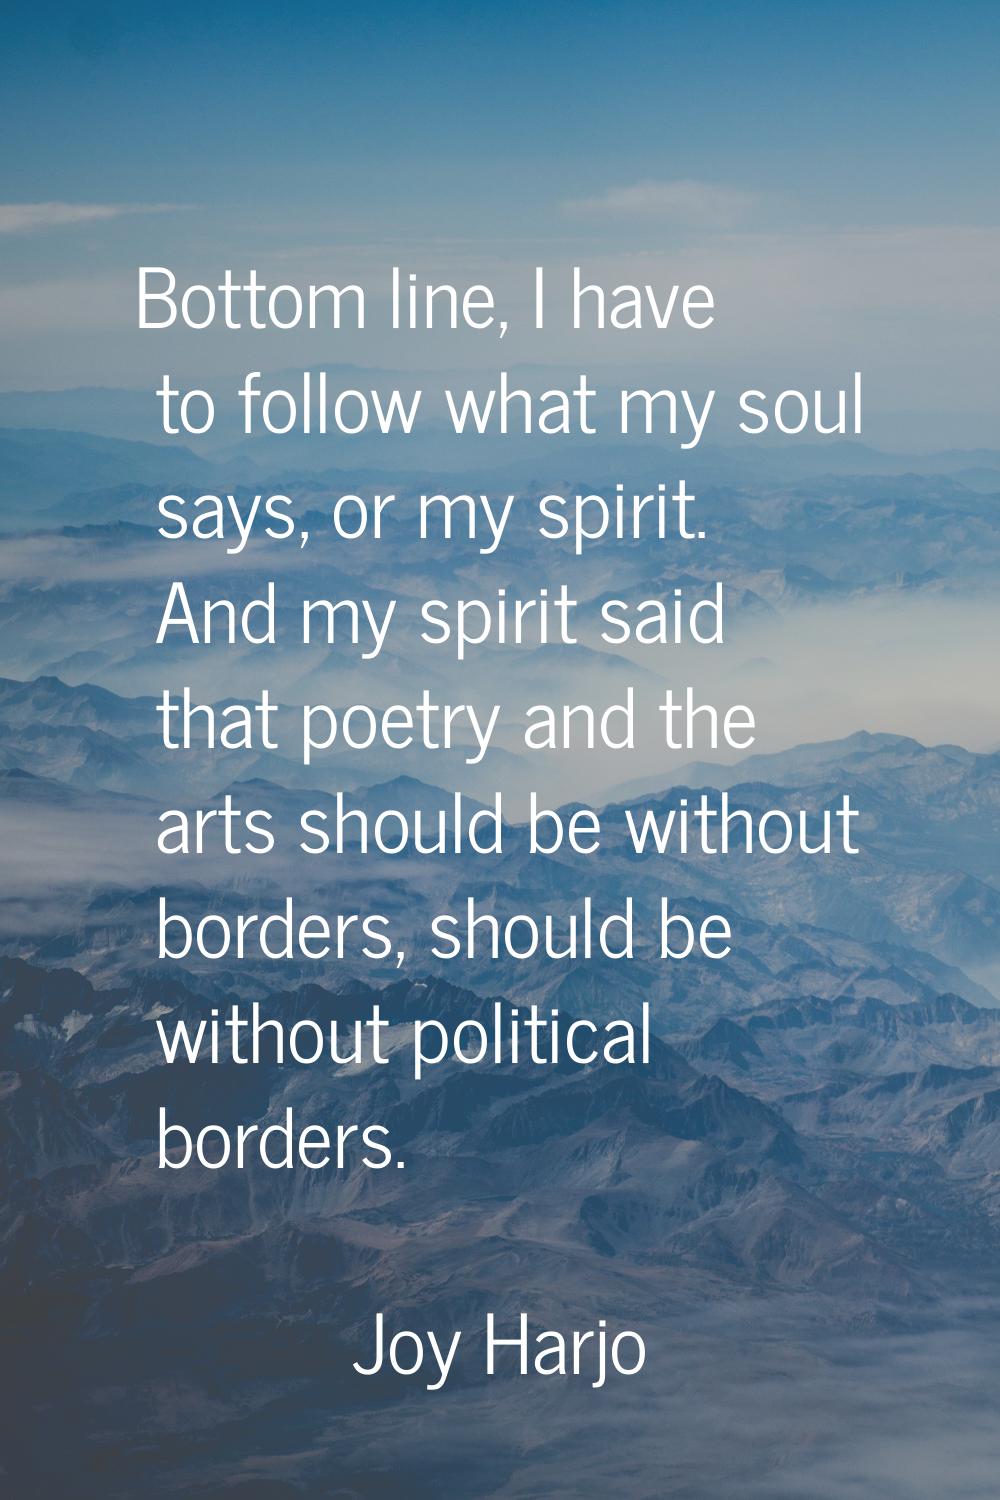 Bottom line, I have to follow what my soul says, or my spirit. And my spirit said that poetry and t